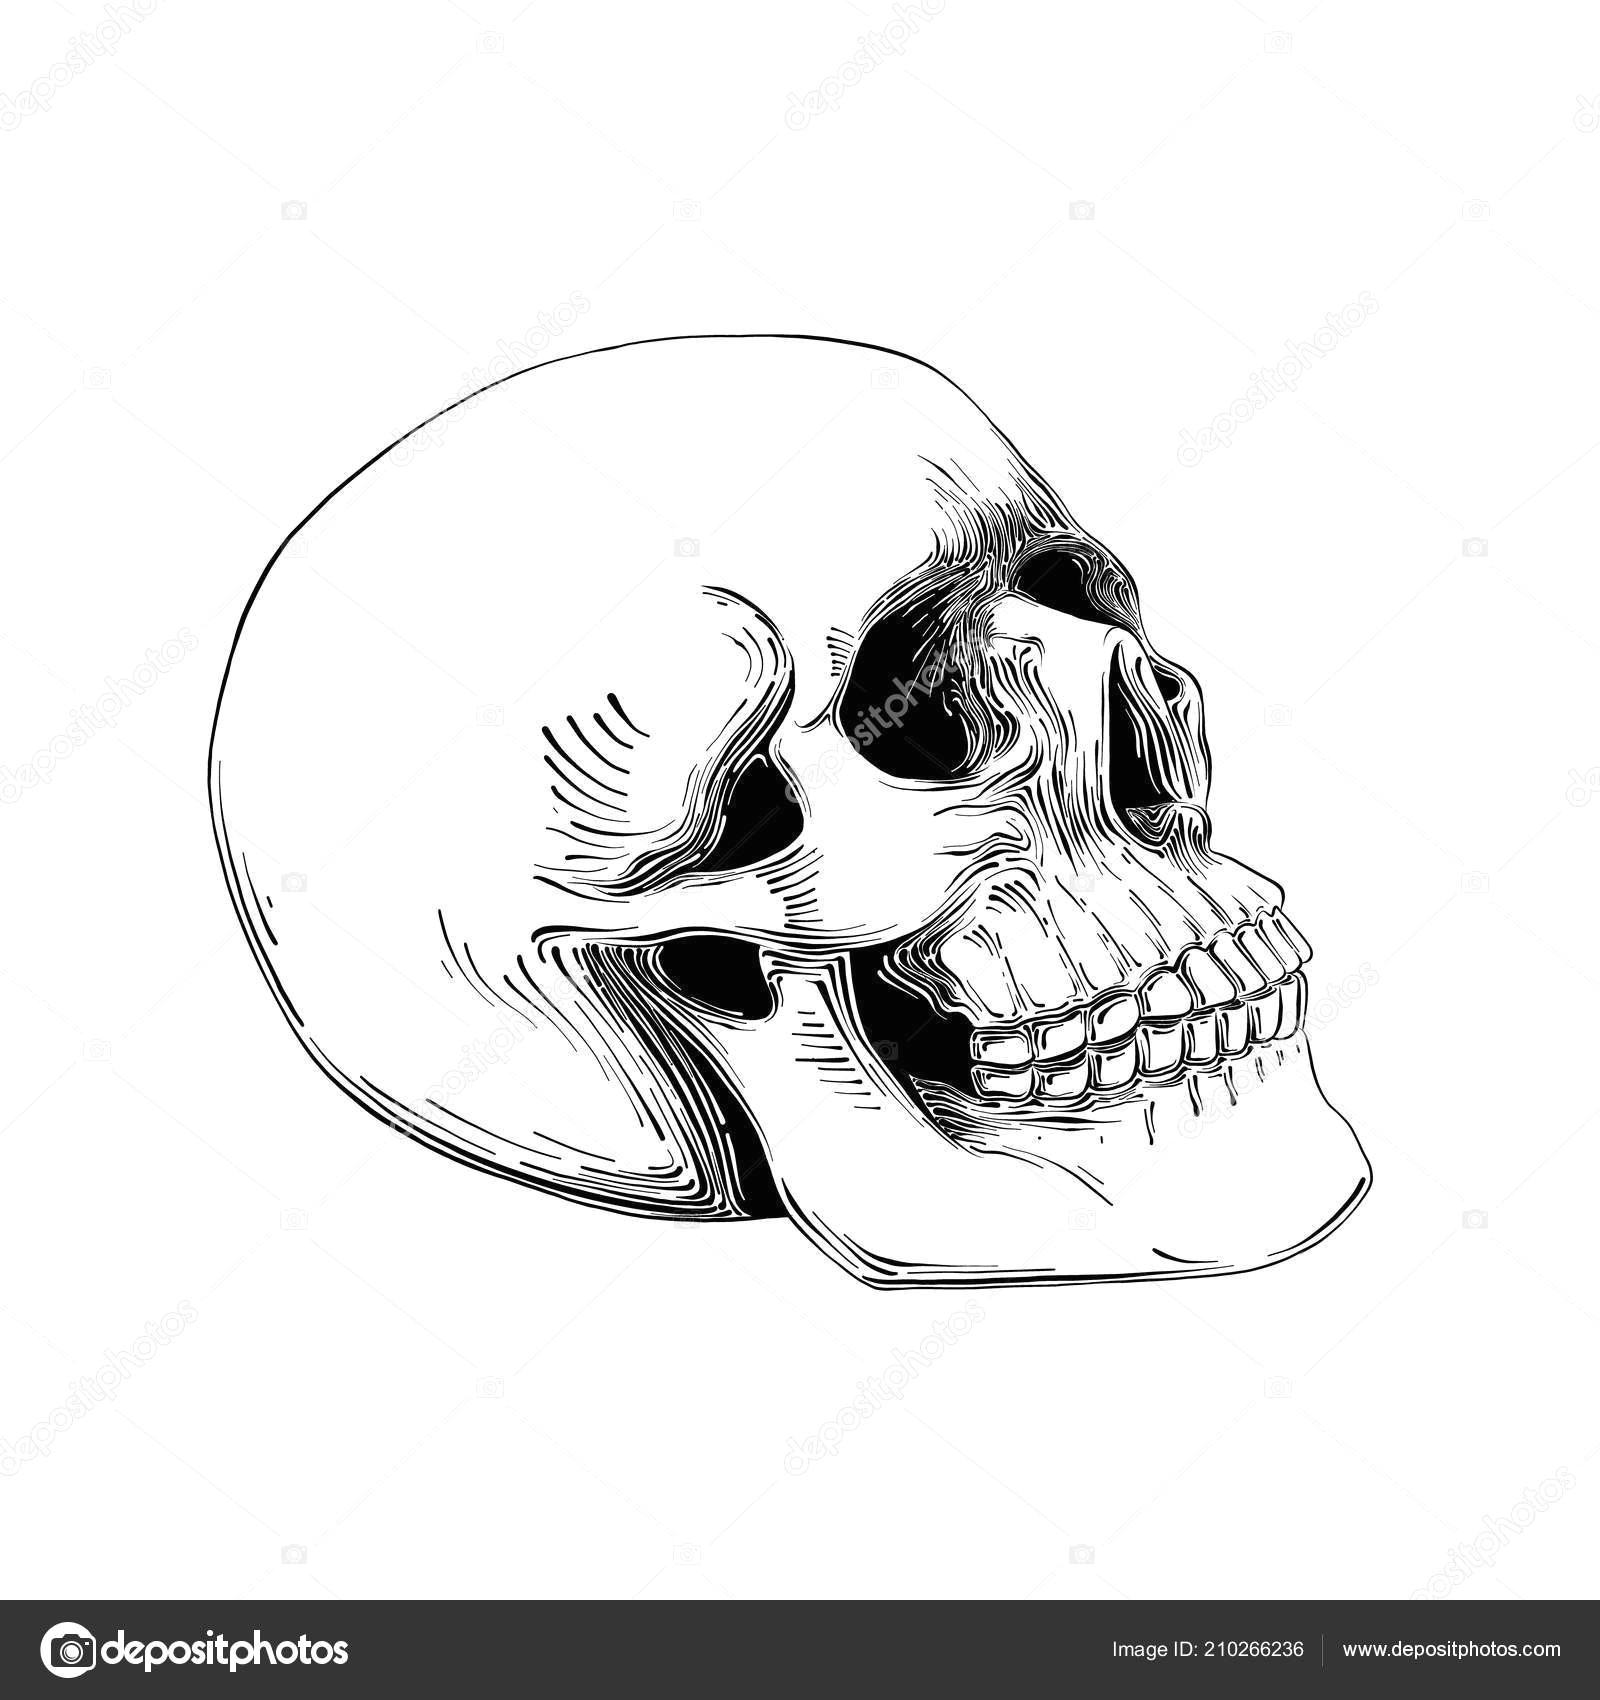 Skull Drawing Black Background Hand Drawn Sketch Of Skull In Black isolated On White Background